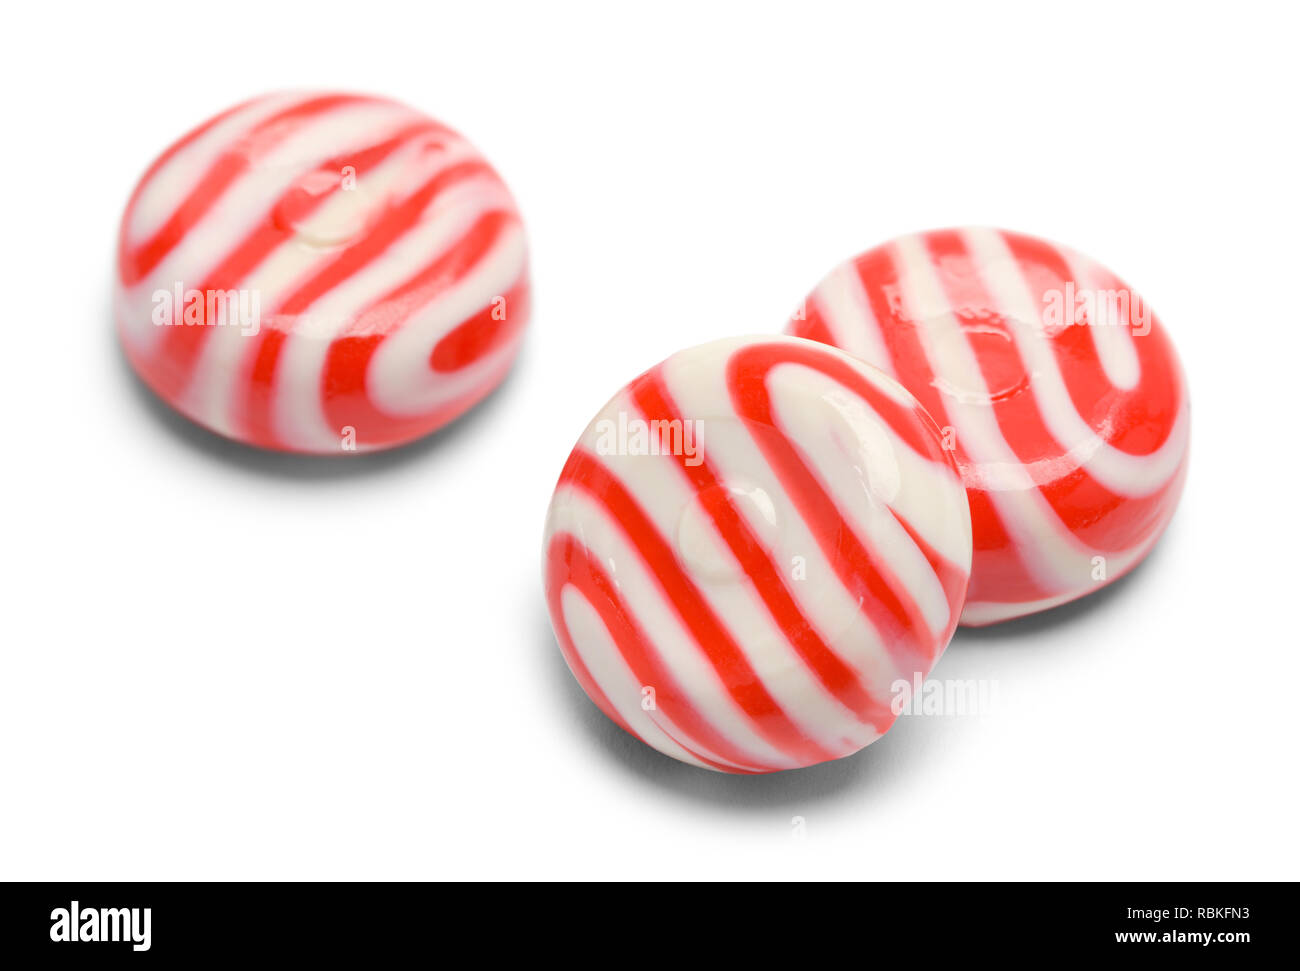 Three Peppermint Candies Isolated on White Background. Stock Photo